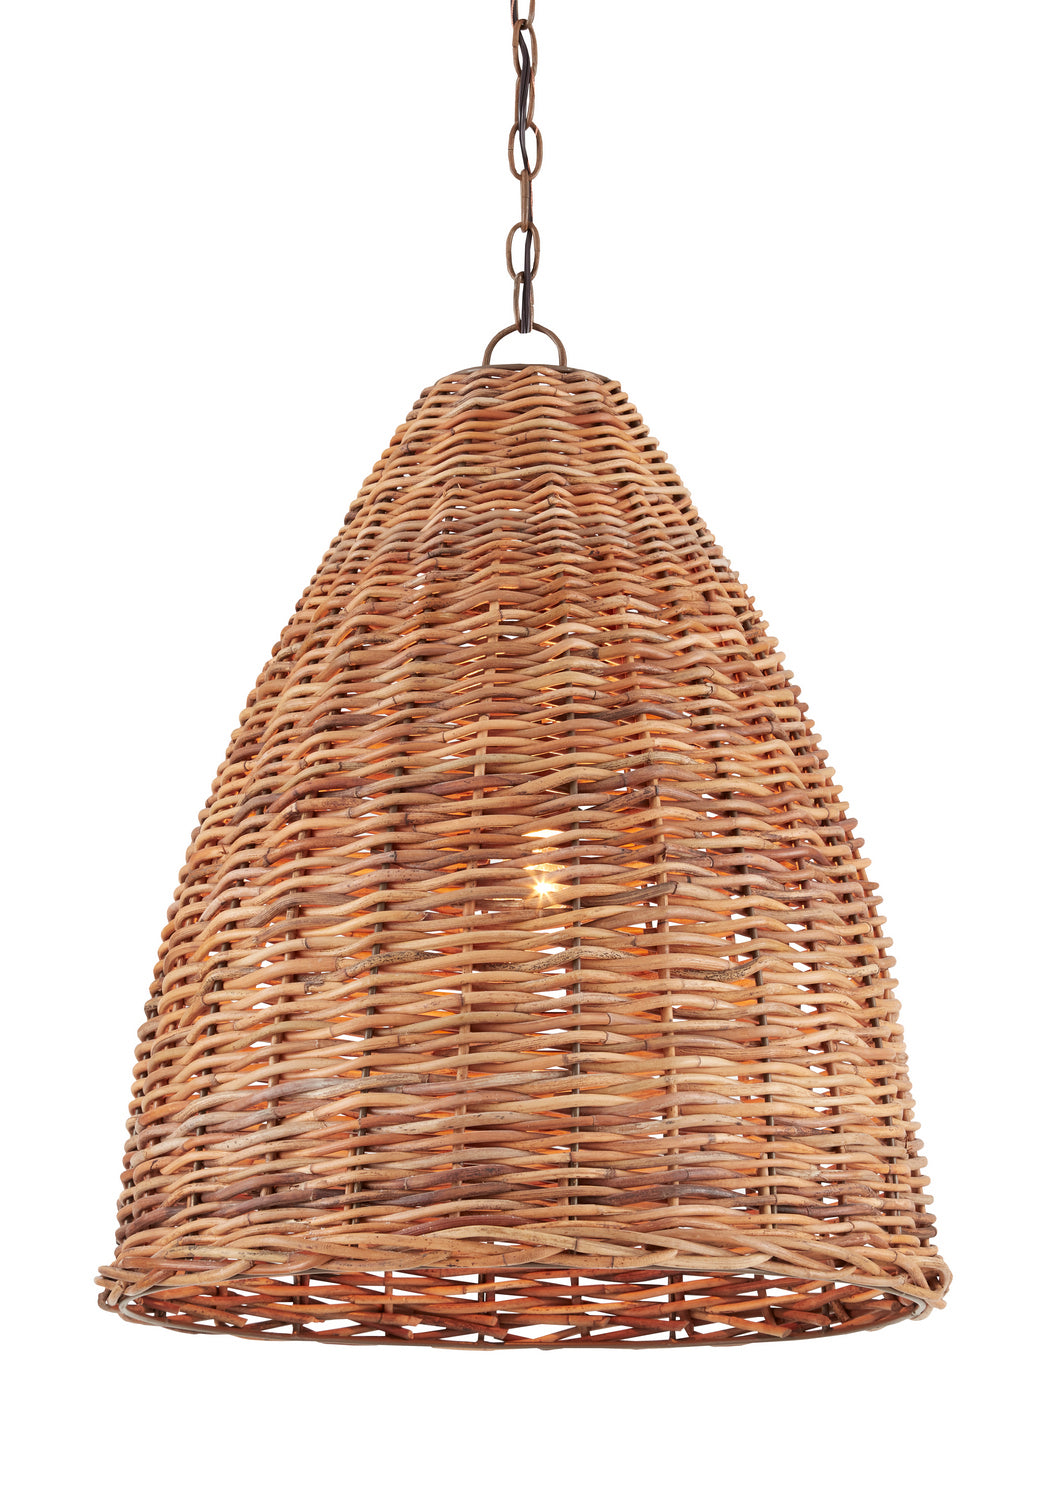 One Light Pendant from the Basket collection in Natural finish